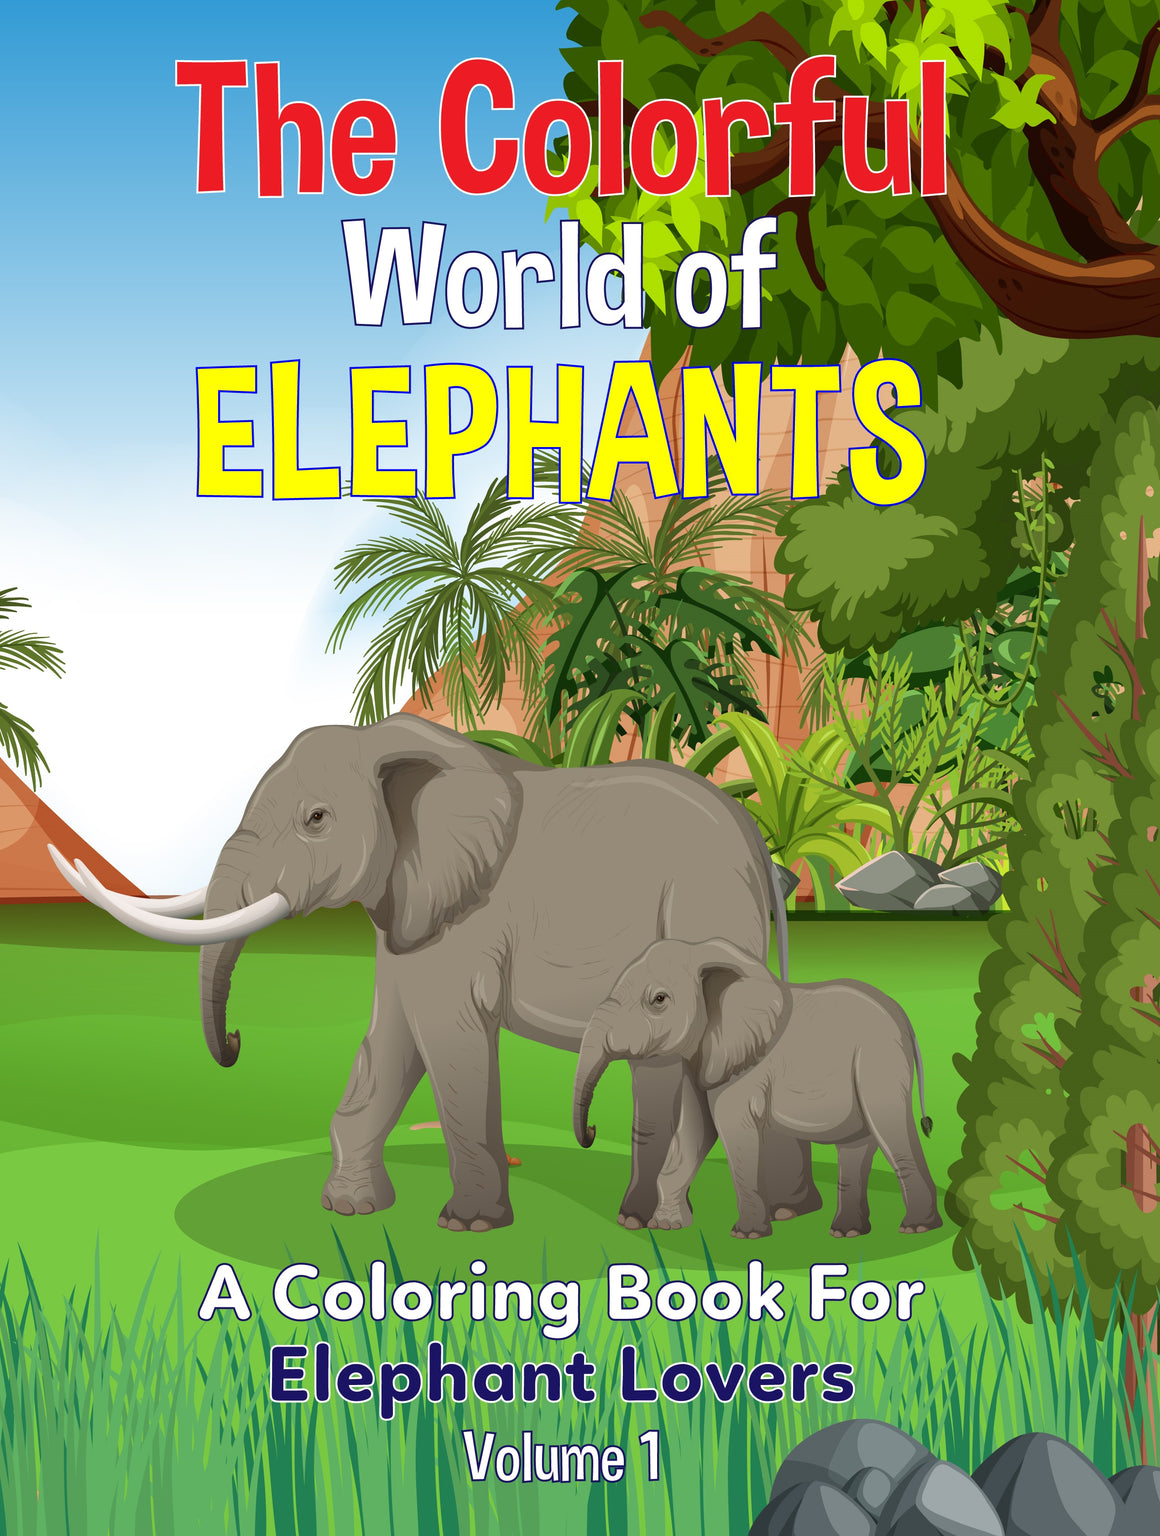 The Colorful World of Elephants Volume 1